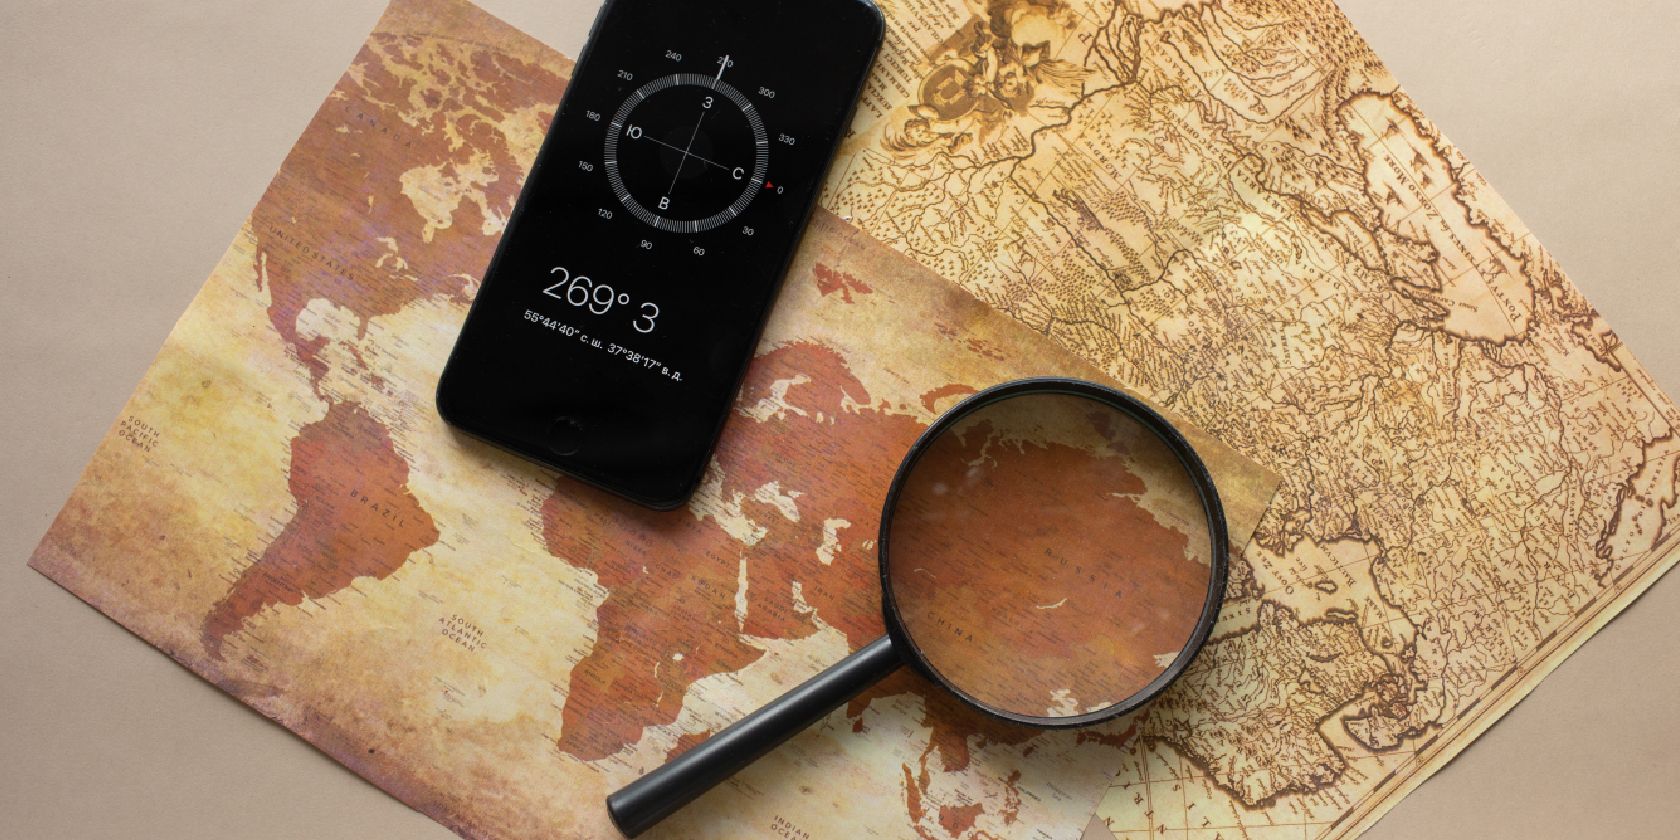 A magnifying glass and a phone display a compass app on top of two old-fashioned maps.